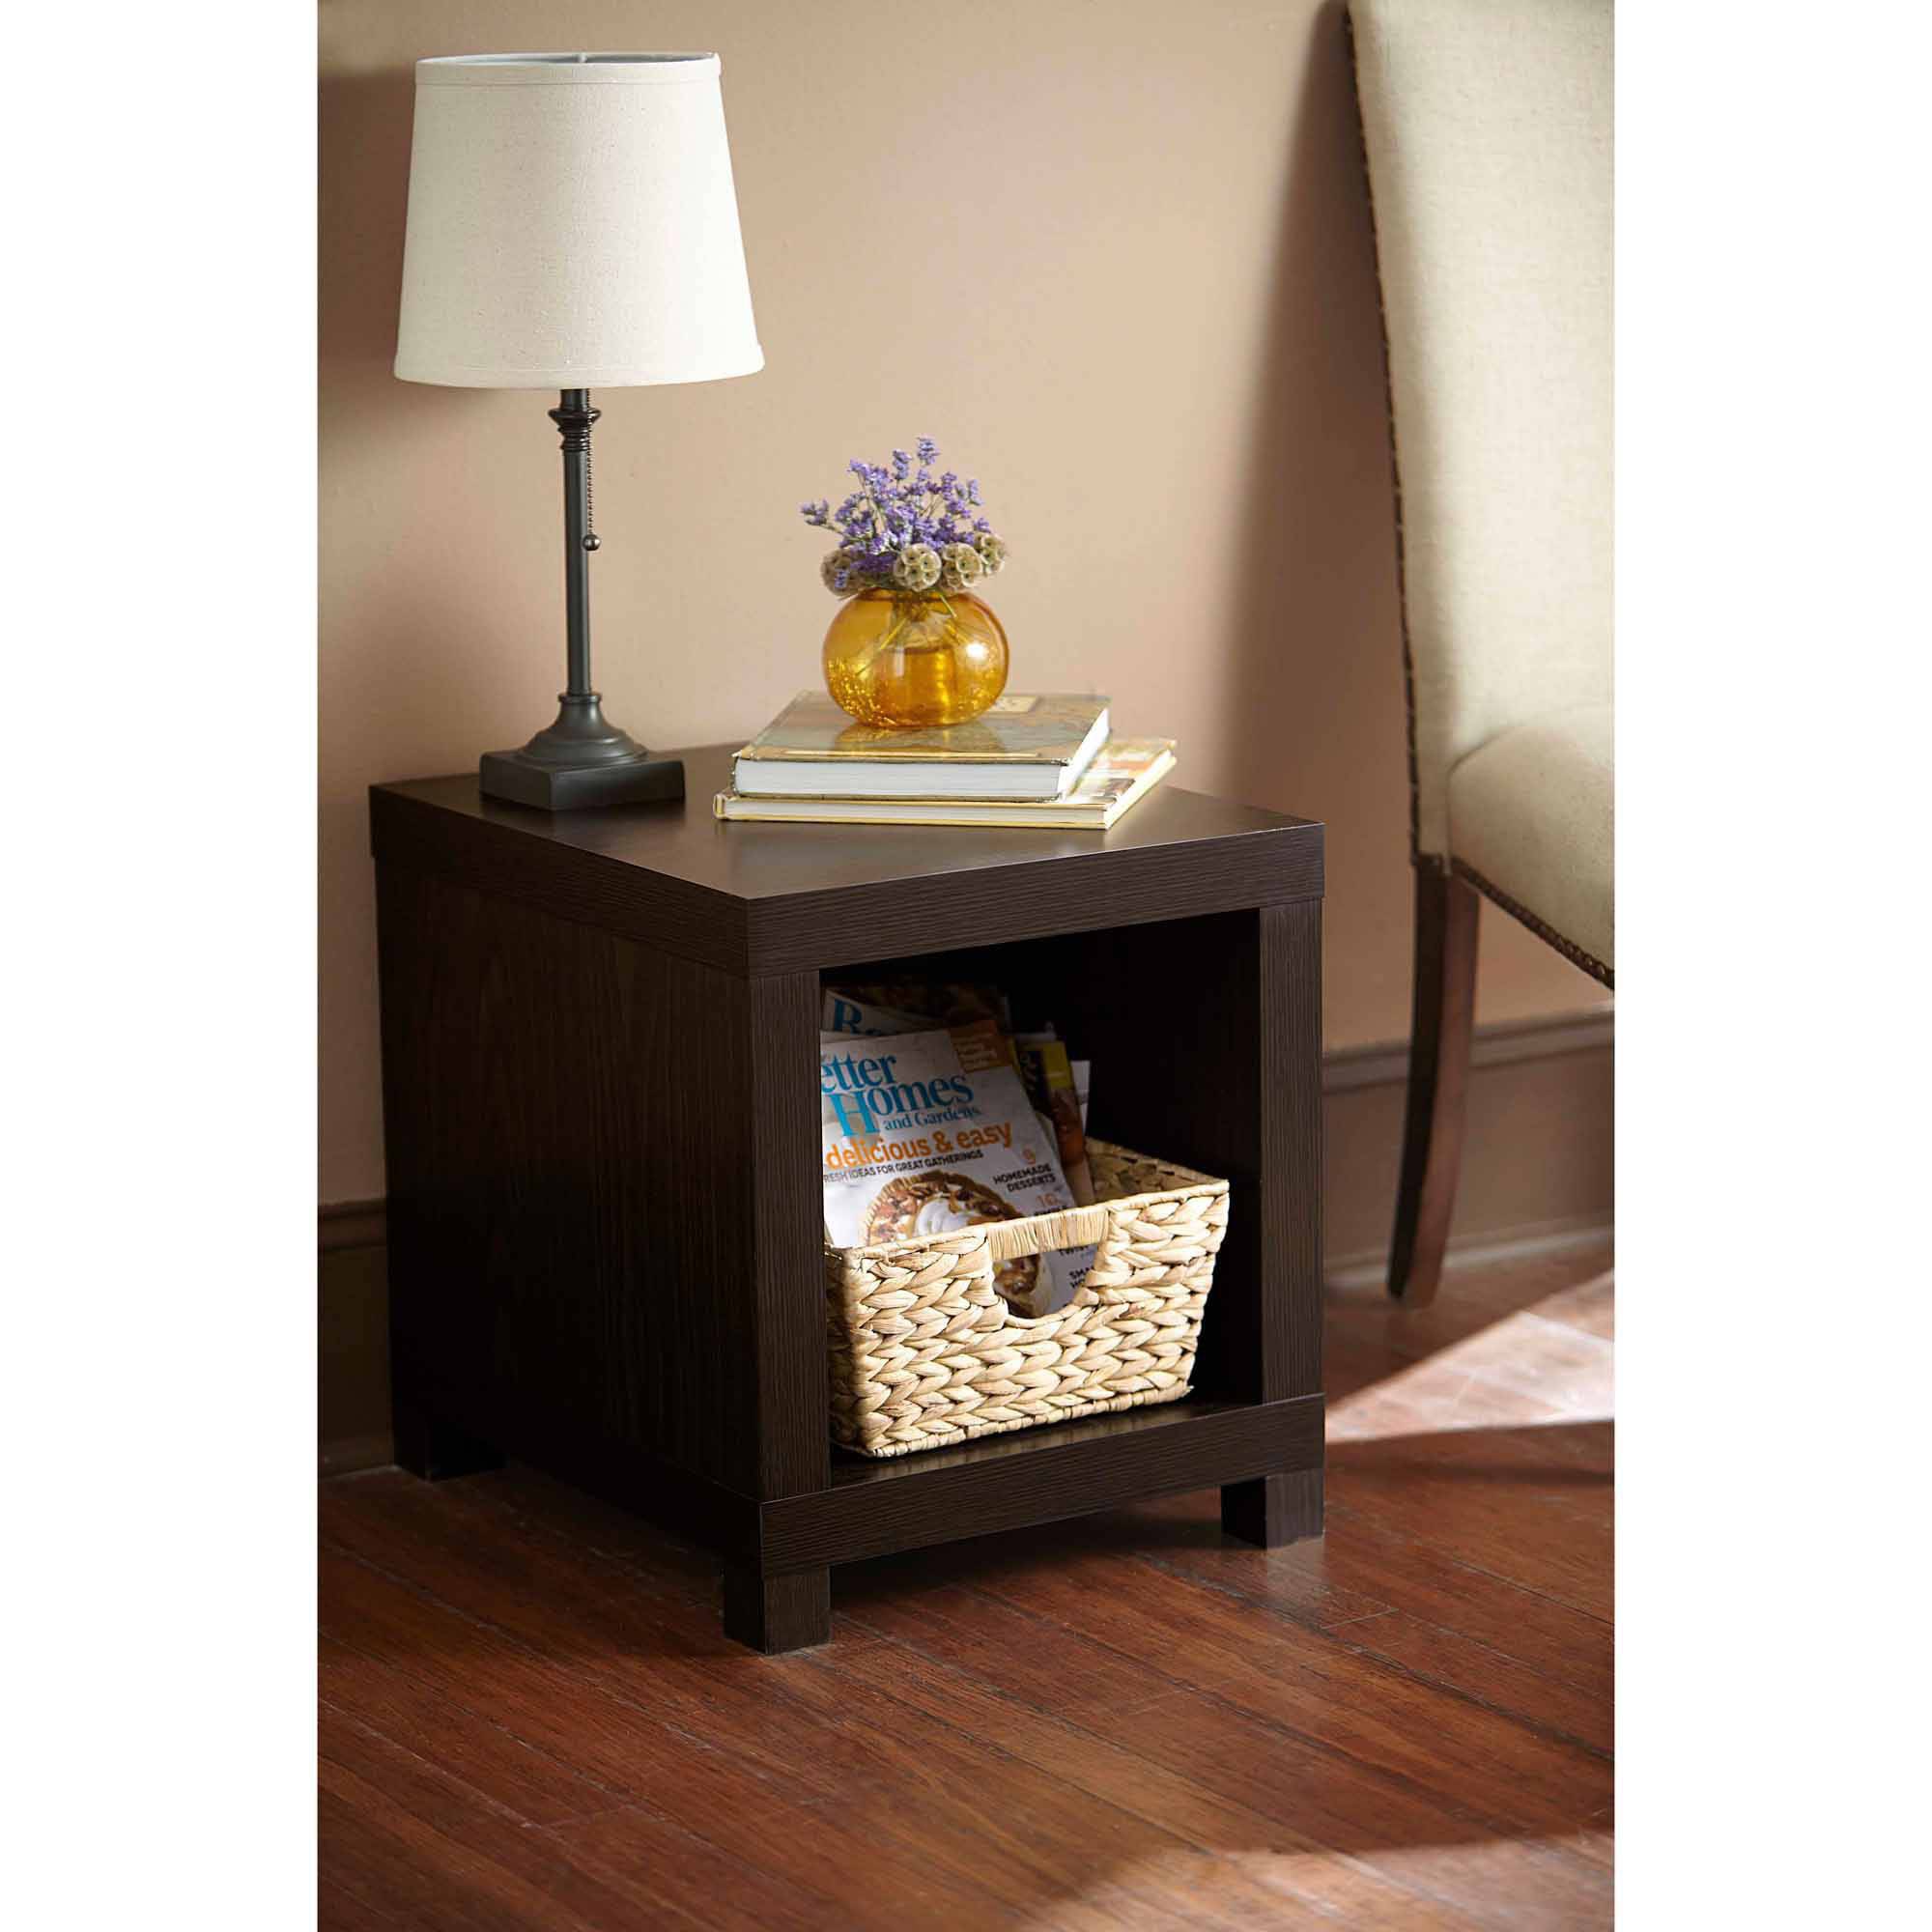 better homes gardens accent table multiple colors under target furniture coffee inch wide console bronze frog retro bedroom hairpin leg desk cool floor lamps small occasional with